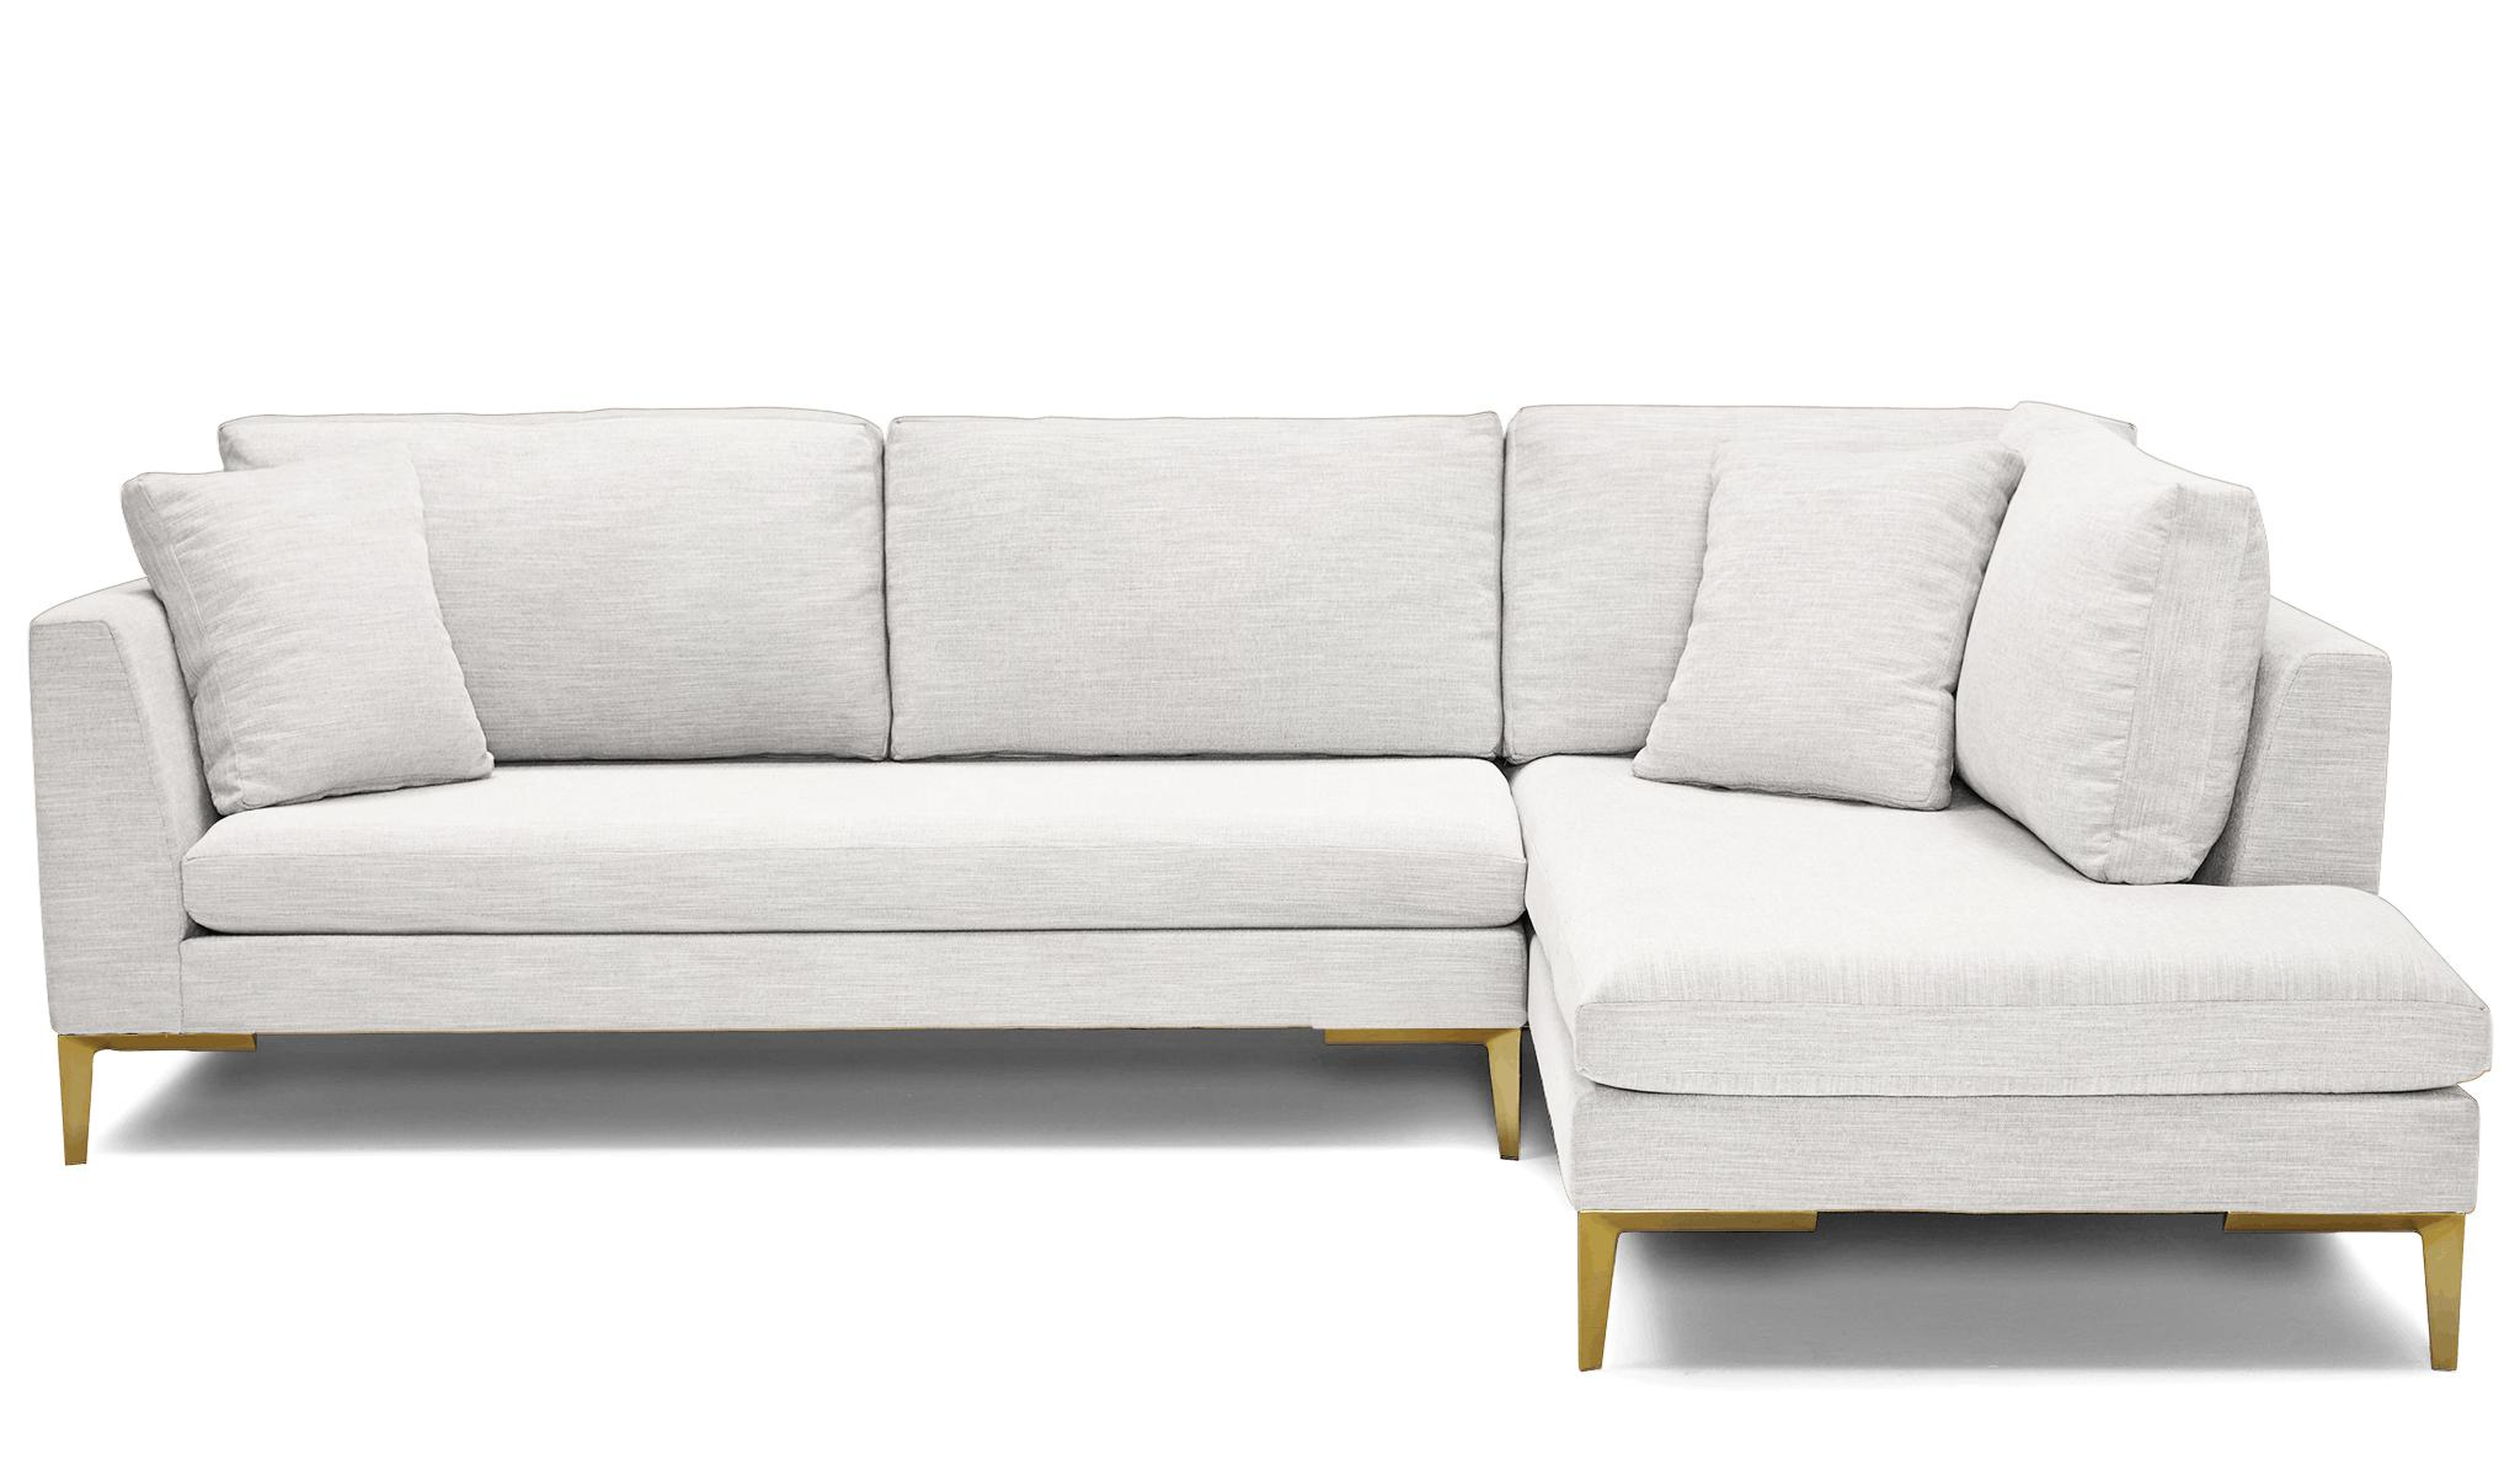 White Ainsley Mid Century Modern Sectional with Bumper - Tussah Blizzard - Left - Joybird